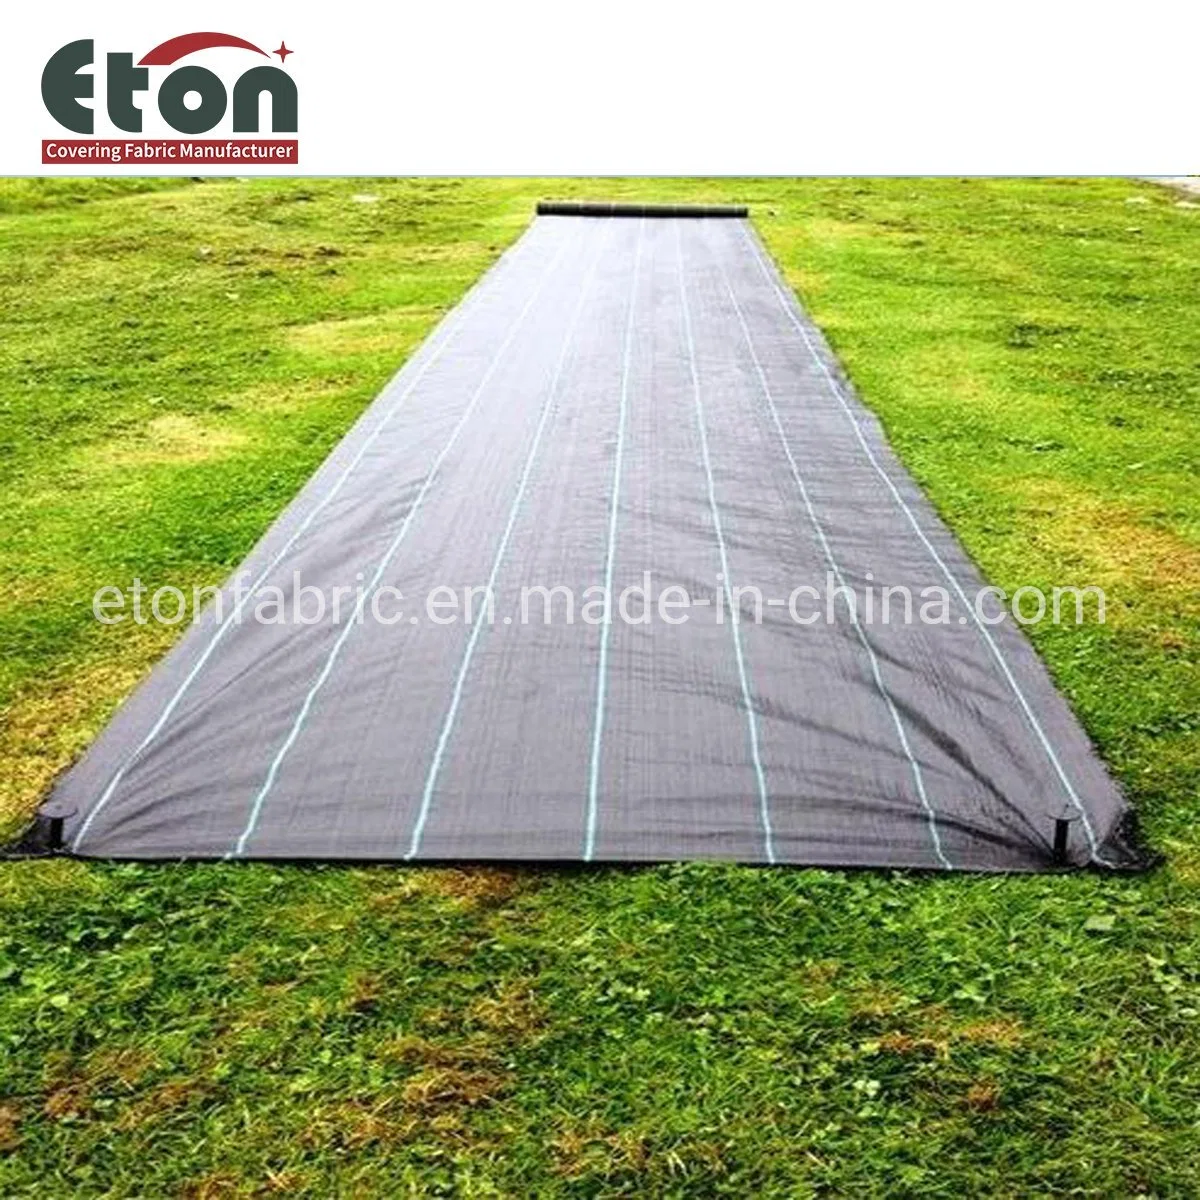 100GSM PP Woven Geotextile Weed Mat Ground Cover for Agriculture/Greenhouse